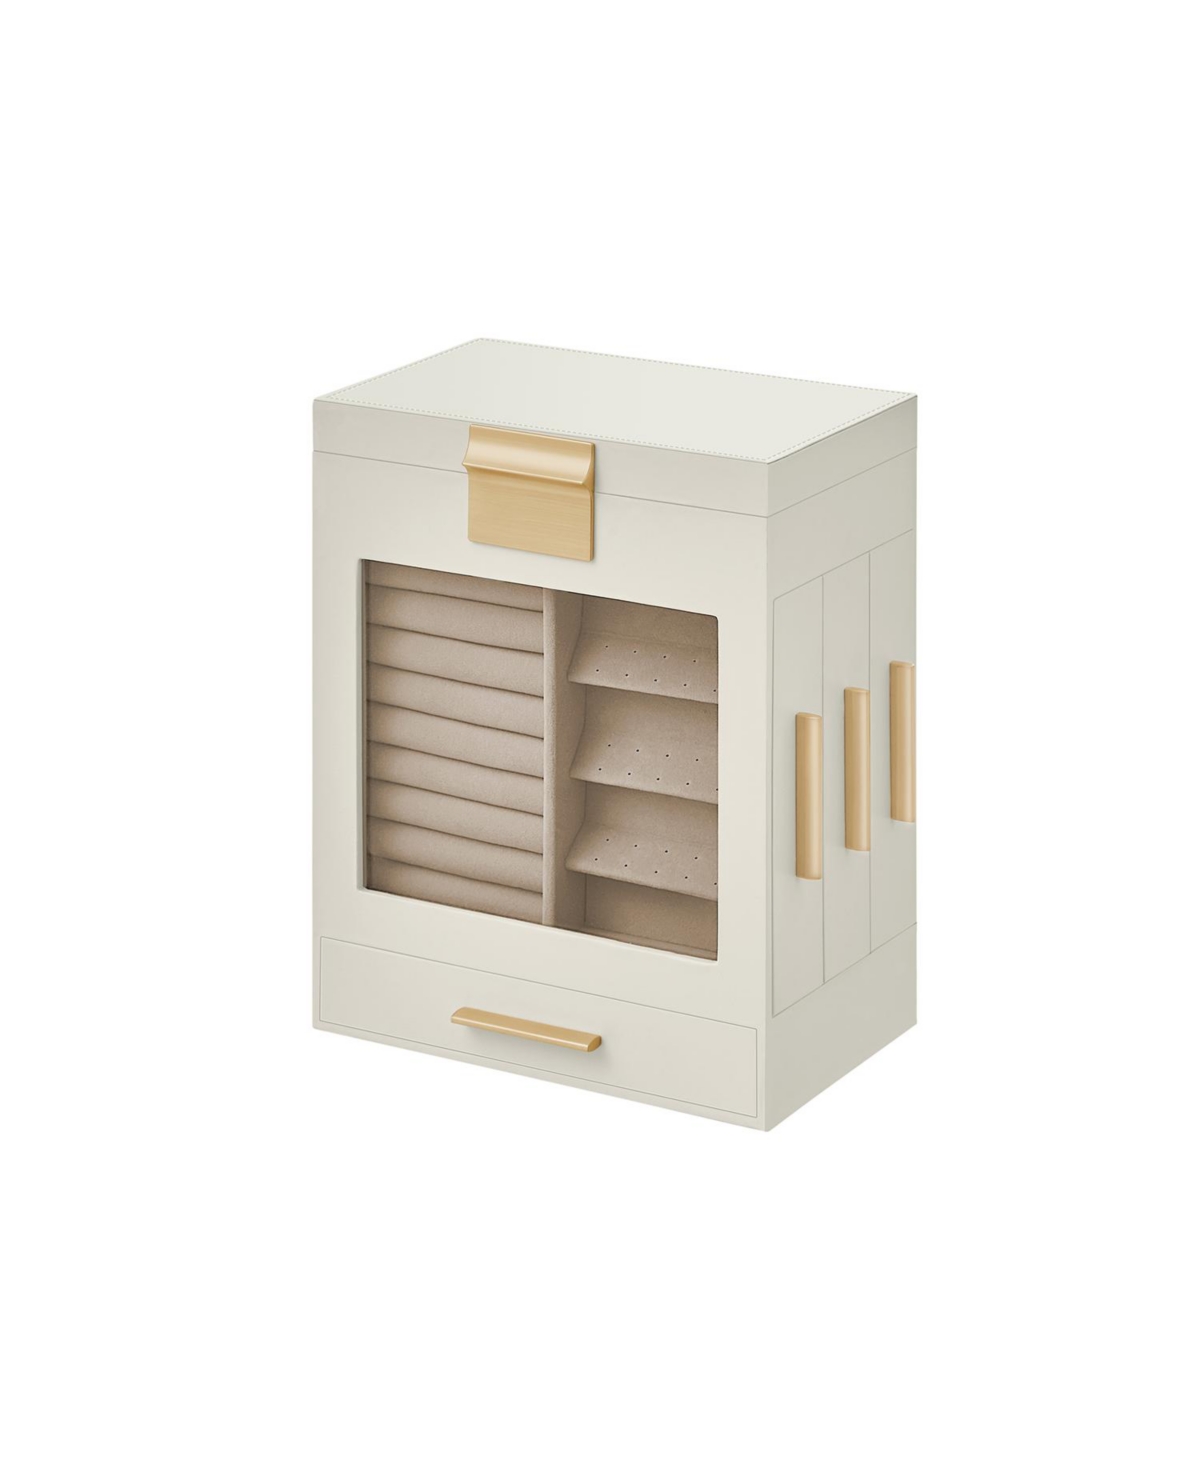 5-layer Jewelry Organiser With 3 Side Drawers - White